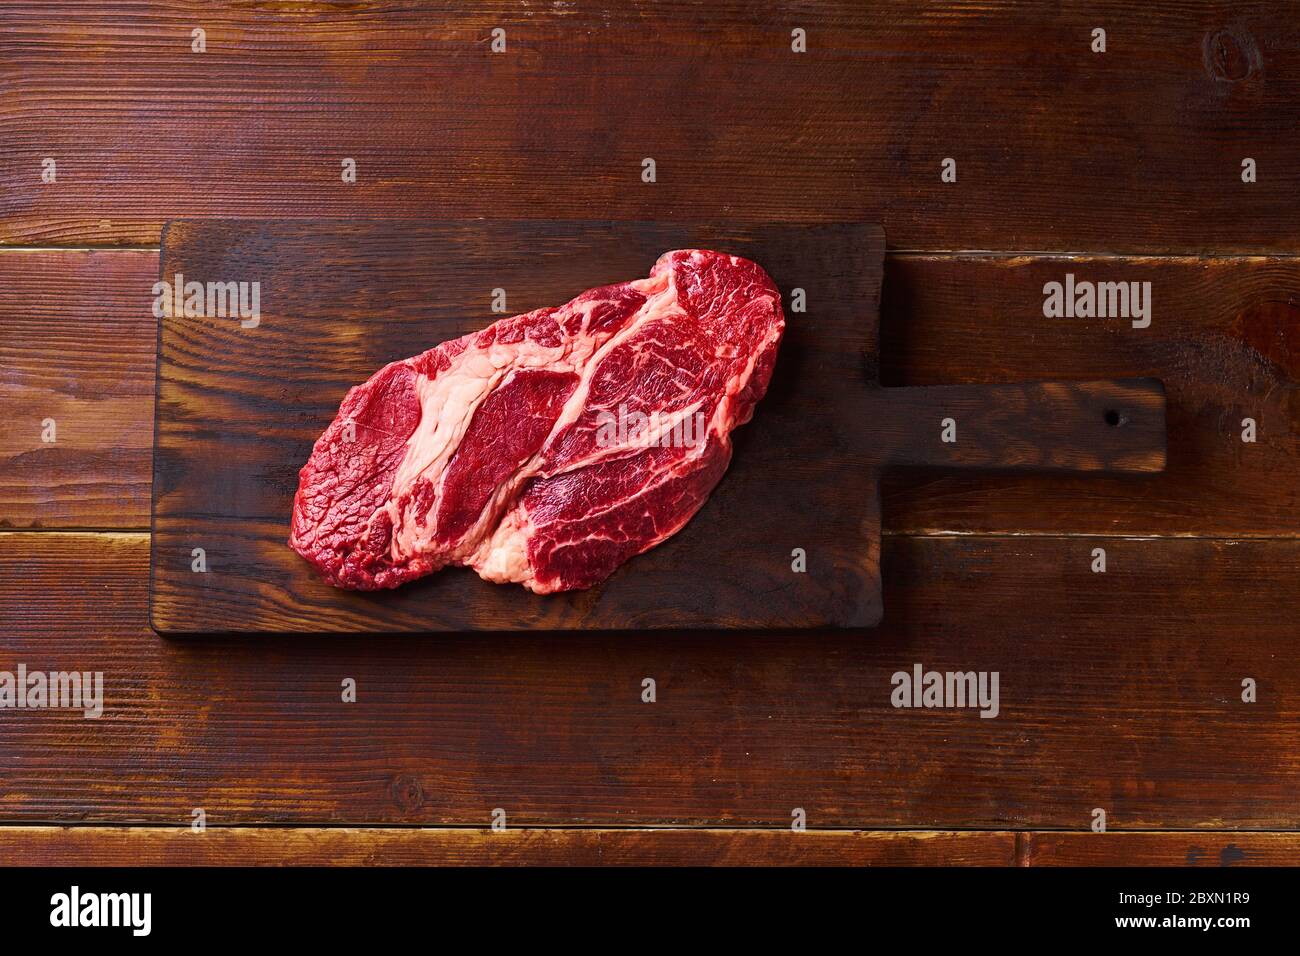 Top view Black Angus prime beef rib eye steak on cutting board wooden background copy space Stock Photo